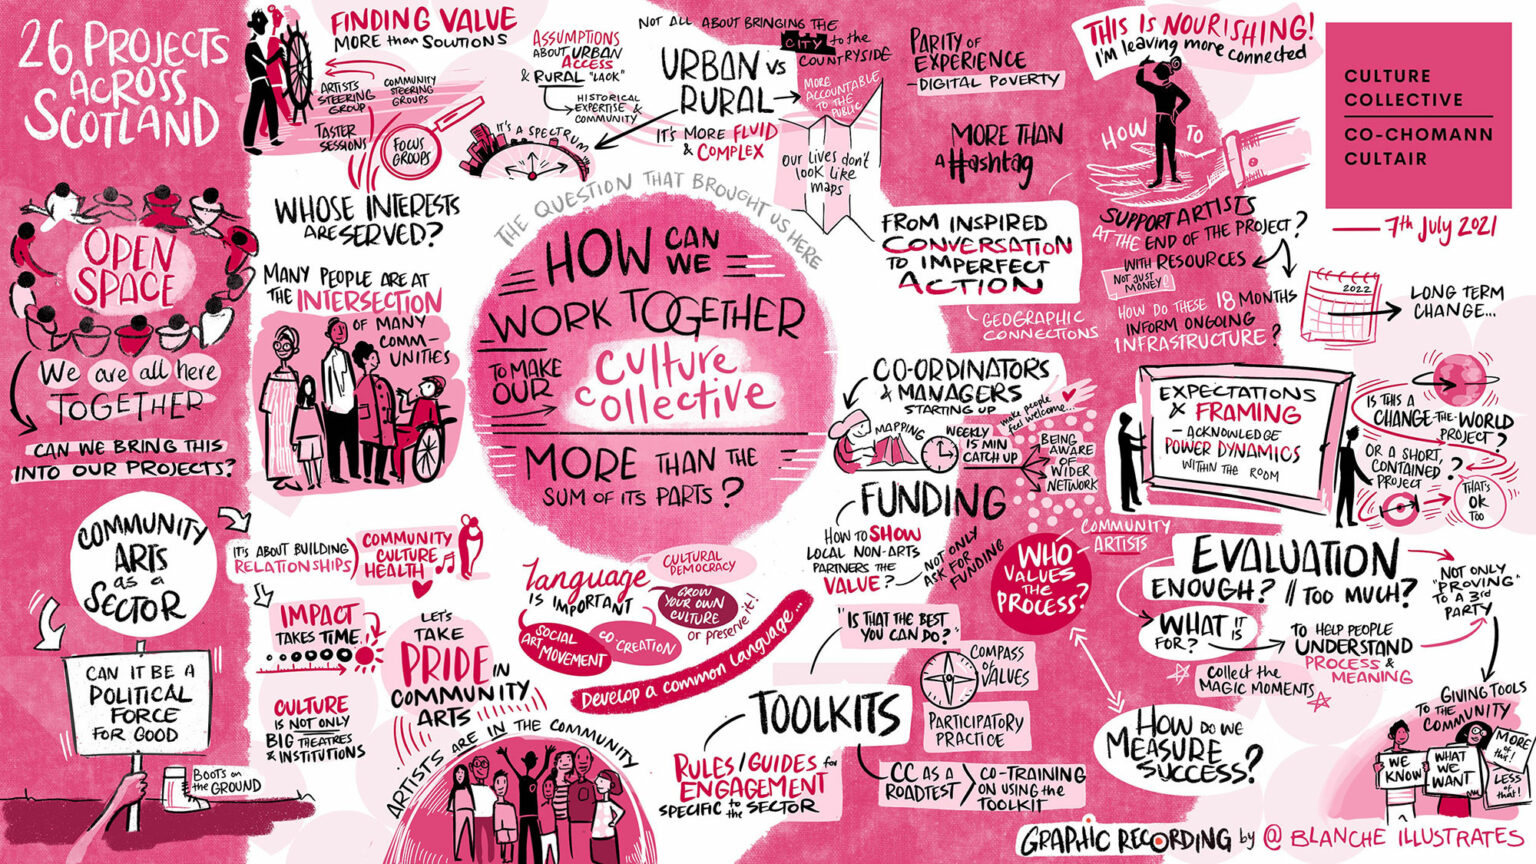 The visual minutes are a hand drawn illustration in pink and white. In the middle of the page is a large circle with white text, which asks the question from the session. It says: “The question that brought us here: How can we work together to make our Culture Collective more than the sum of its parts?”. The remainder of the illustration captures the key points from the session which are, in the order that they appear on the illustration: Community Arts as a sector, can it be a political force for good? There's an illustration of a walking boot with the words ‘boots on the ground’. It says it's about building relationships, and impact takes time. Culture is not only big theatres and institutions. Let's take pride in community arts, artists are in the community, and there is a capture of key words which are community, culture and health. The next section asks ‘whose interests are served?’ It looks at things like focus groups, taster sessions, artists, steering groups, community steering groups, and finding value more than solutions. Many people are at the intersection of many communities. And there's an illustration of a diverse collection of people. The next section is headlined urban versus rural. And it says ‘it's more fluid and complex than that, it's a spectrum’. It asks us to tackle assumptions about urban access, and rural “lack” (in inverted commas), and the historical expertise within communities. It notes that not everything should be about bringing the city to the countryside. And that provision should be more accountable to the public. Our lives don't look like maps. The next section looks at how to support artists at the end of this project with resources, not just with money, and asks “how do these 18 months inform ongoing infrastructure?” It notes parity of experience is important, particularly around digital poverty, and notes,this should be more than a hashtag. We want to move from inspired conversation to imperfect action, building geographic connections. Some of those connections might be around coordinators and managers or those who are starting up, the illustration wonders whether a weekly 15 minute catch up would make people feel welcomed, and notes that we should be aware of our wider network. We looked at funding, and asked how to show local non-arts partners the value of this work - and to not only ask for funding in relationship building. There was a conversation around toolkits, noting That The Best You Can Be? There is a compass of values and participatory practice and notes that Culture Collective is a road test. And that there could be co-training on using any toolkit that emerges. It discusses rules or guides for engagement specific to the sector. And asks “Who values the process?”, or “How do we measure success?” There's a quote from someone who attended saying “This is nourishing, I'm leaving more connected”. Next we talked about expectations and framing - acknowledging the power dynamics within the room and asked “Is this a ‘change the world’ project or a short constrained project?” And we noted that that's okay too. The final section touches on evaluation and asks “What is enough? What is too much?” And that evaluation should not only be providing a service to a third party, but should be helping people understand process and meaning to give tools to the community and to collect the magic moments. And there's an illustration of people holding campaign-style banners that read “We know what we want”.